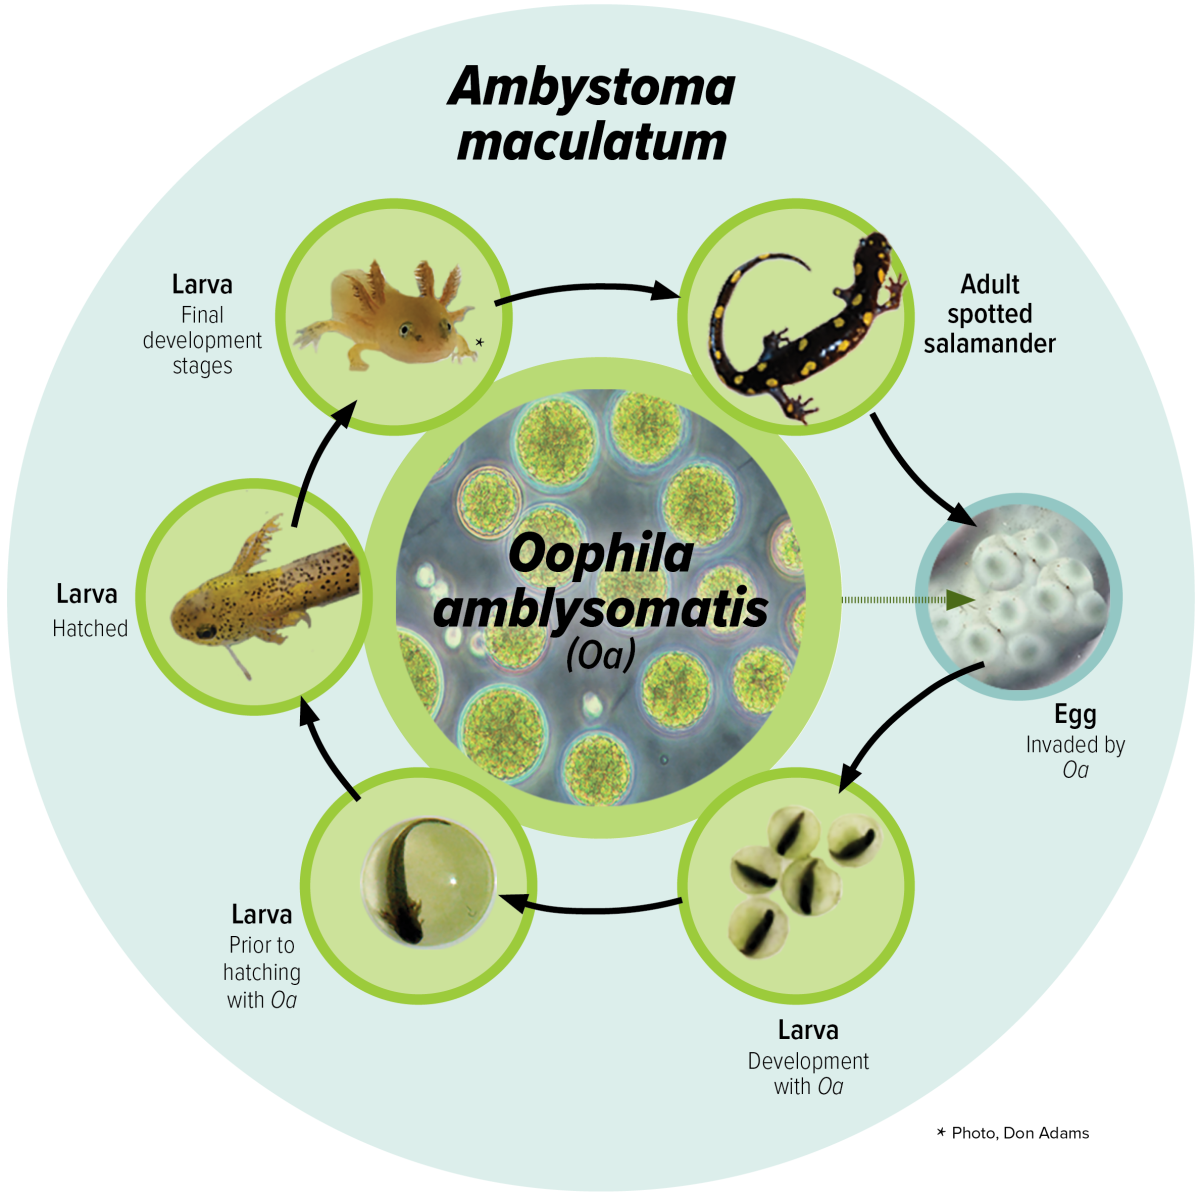 Graphic showing the lifecycle of the spotted salamander, Ambystoma maculatum (Am), and the algal species, Oophila ambystomatis (Oa). The spotted salamander eggs are invaded by the algal species. Throughout the larval stages and into adulthood, the algae and the spotted salamander retain their symbiotic relationship.